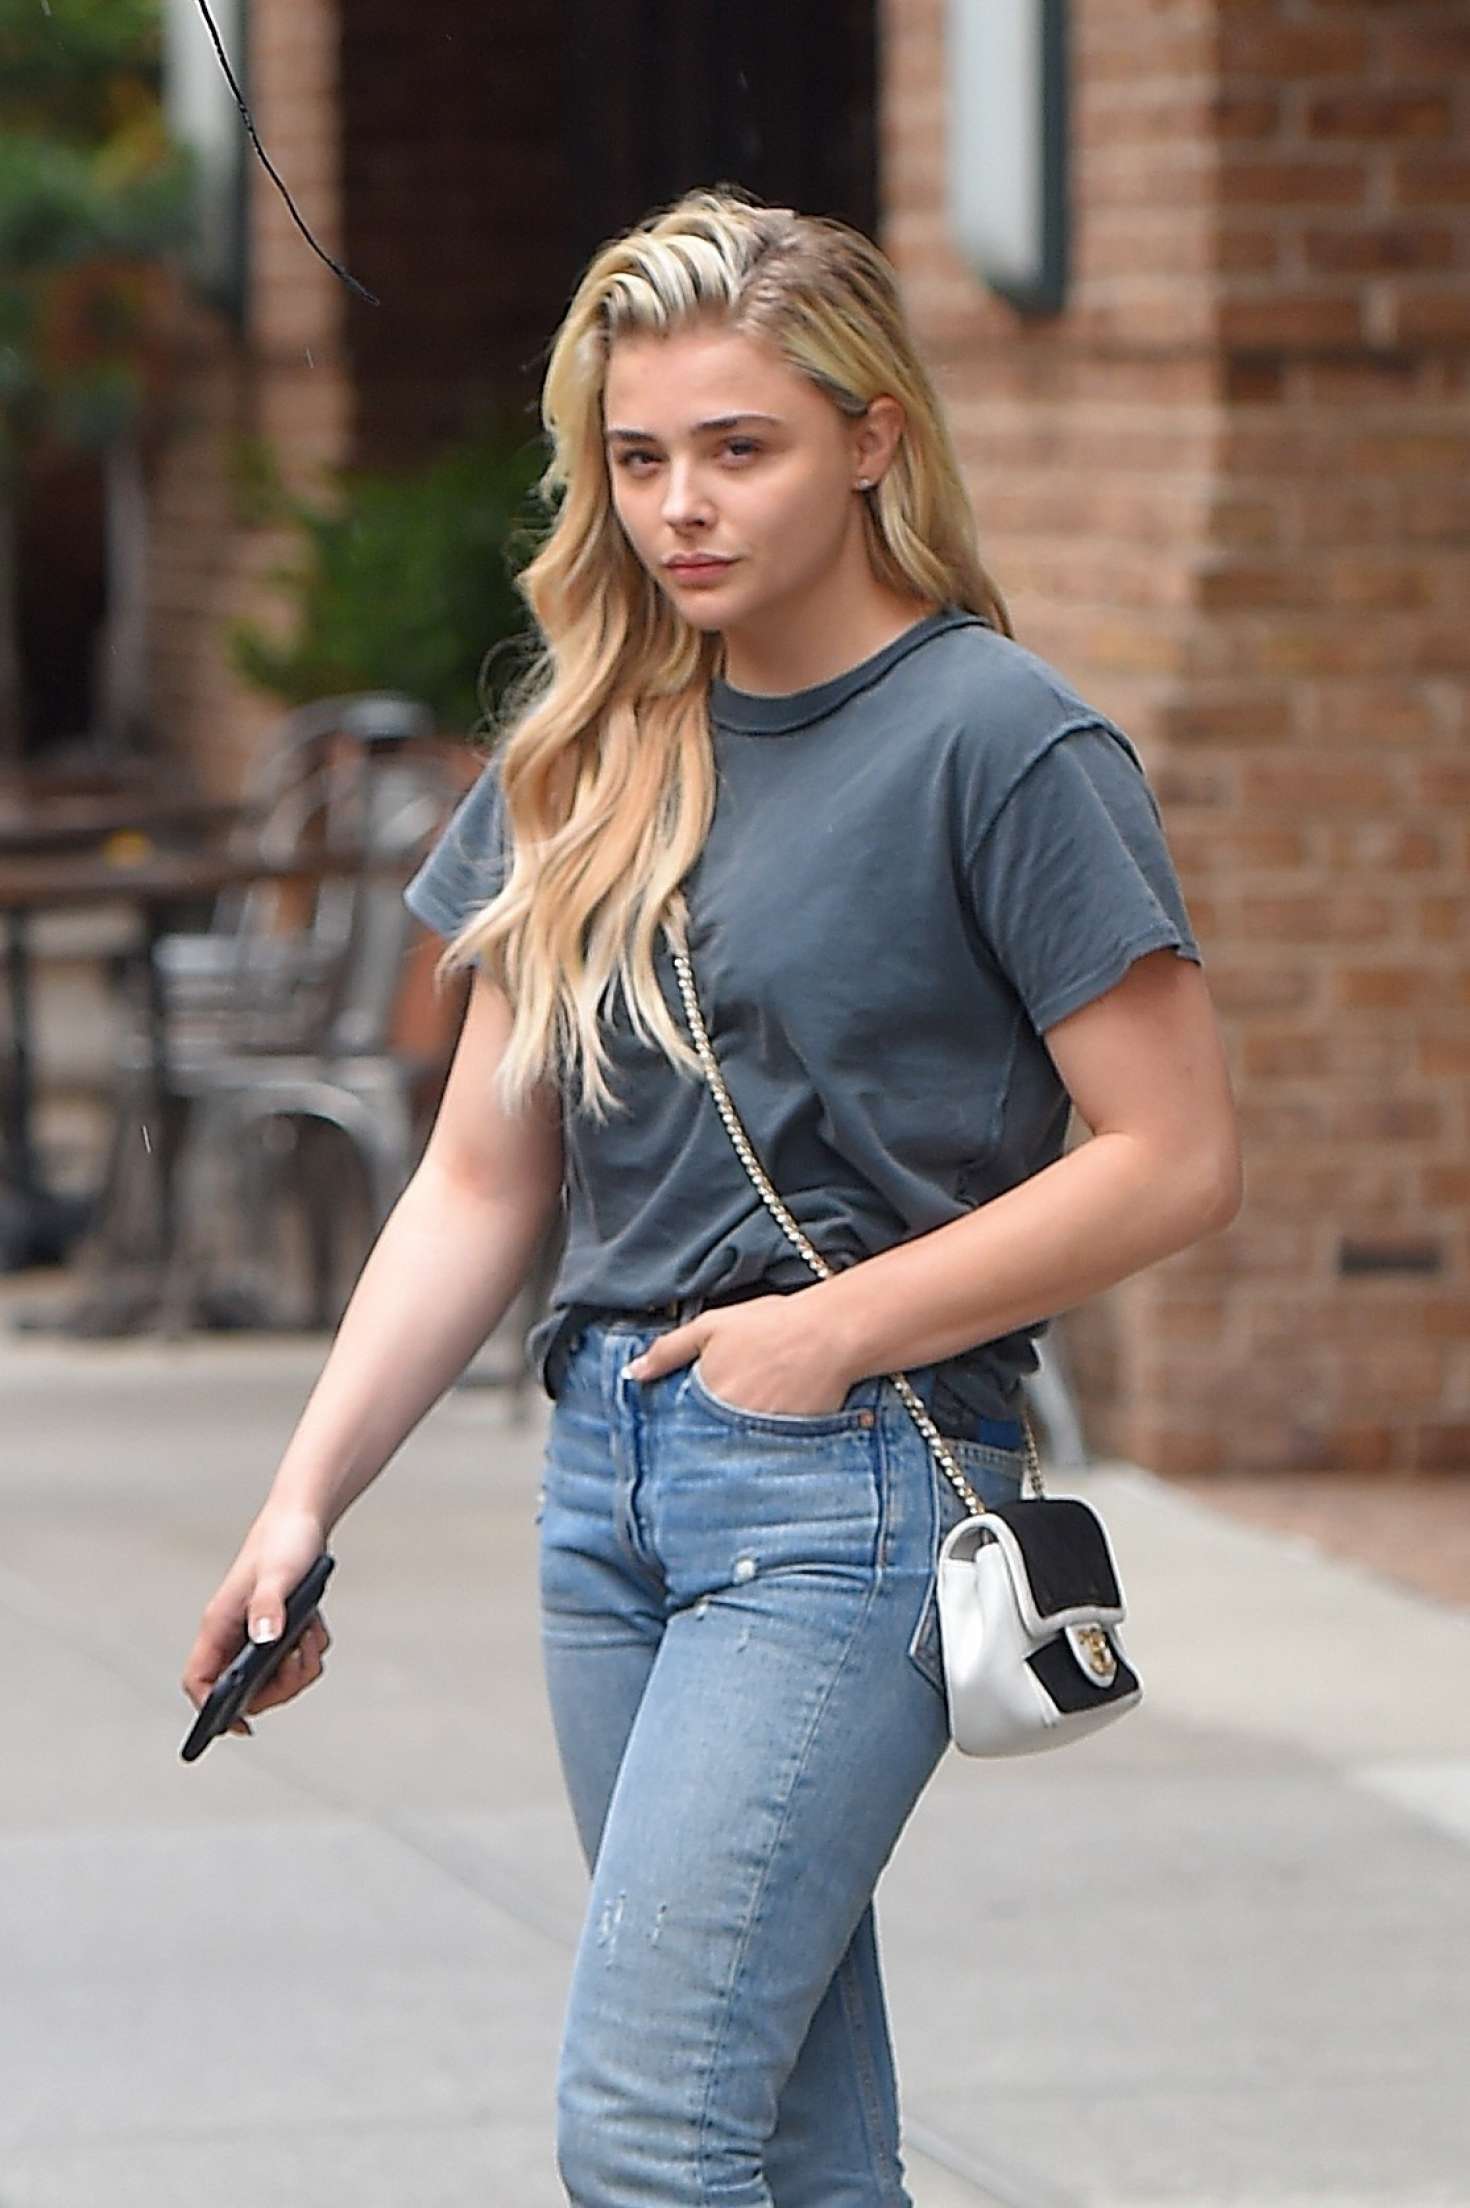 Chloe Moretz in Jeans out in NYC -05 – GotCeleb